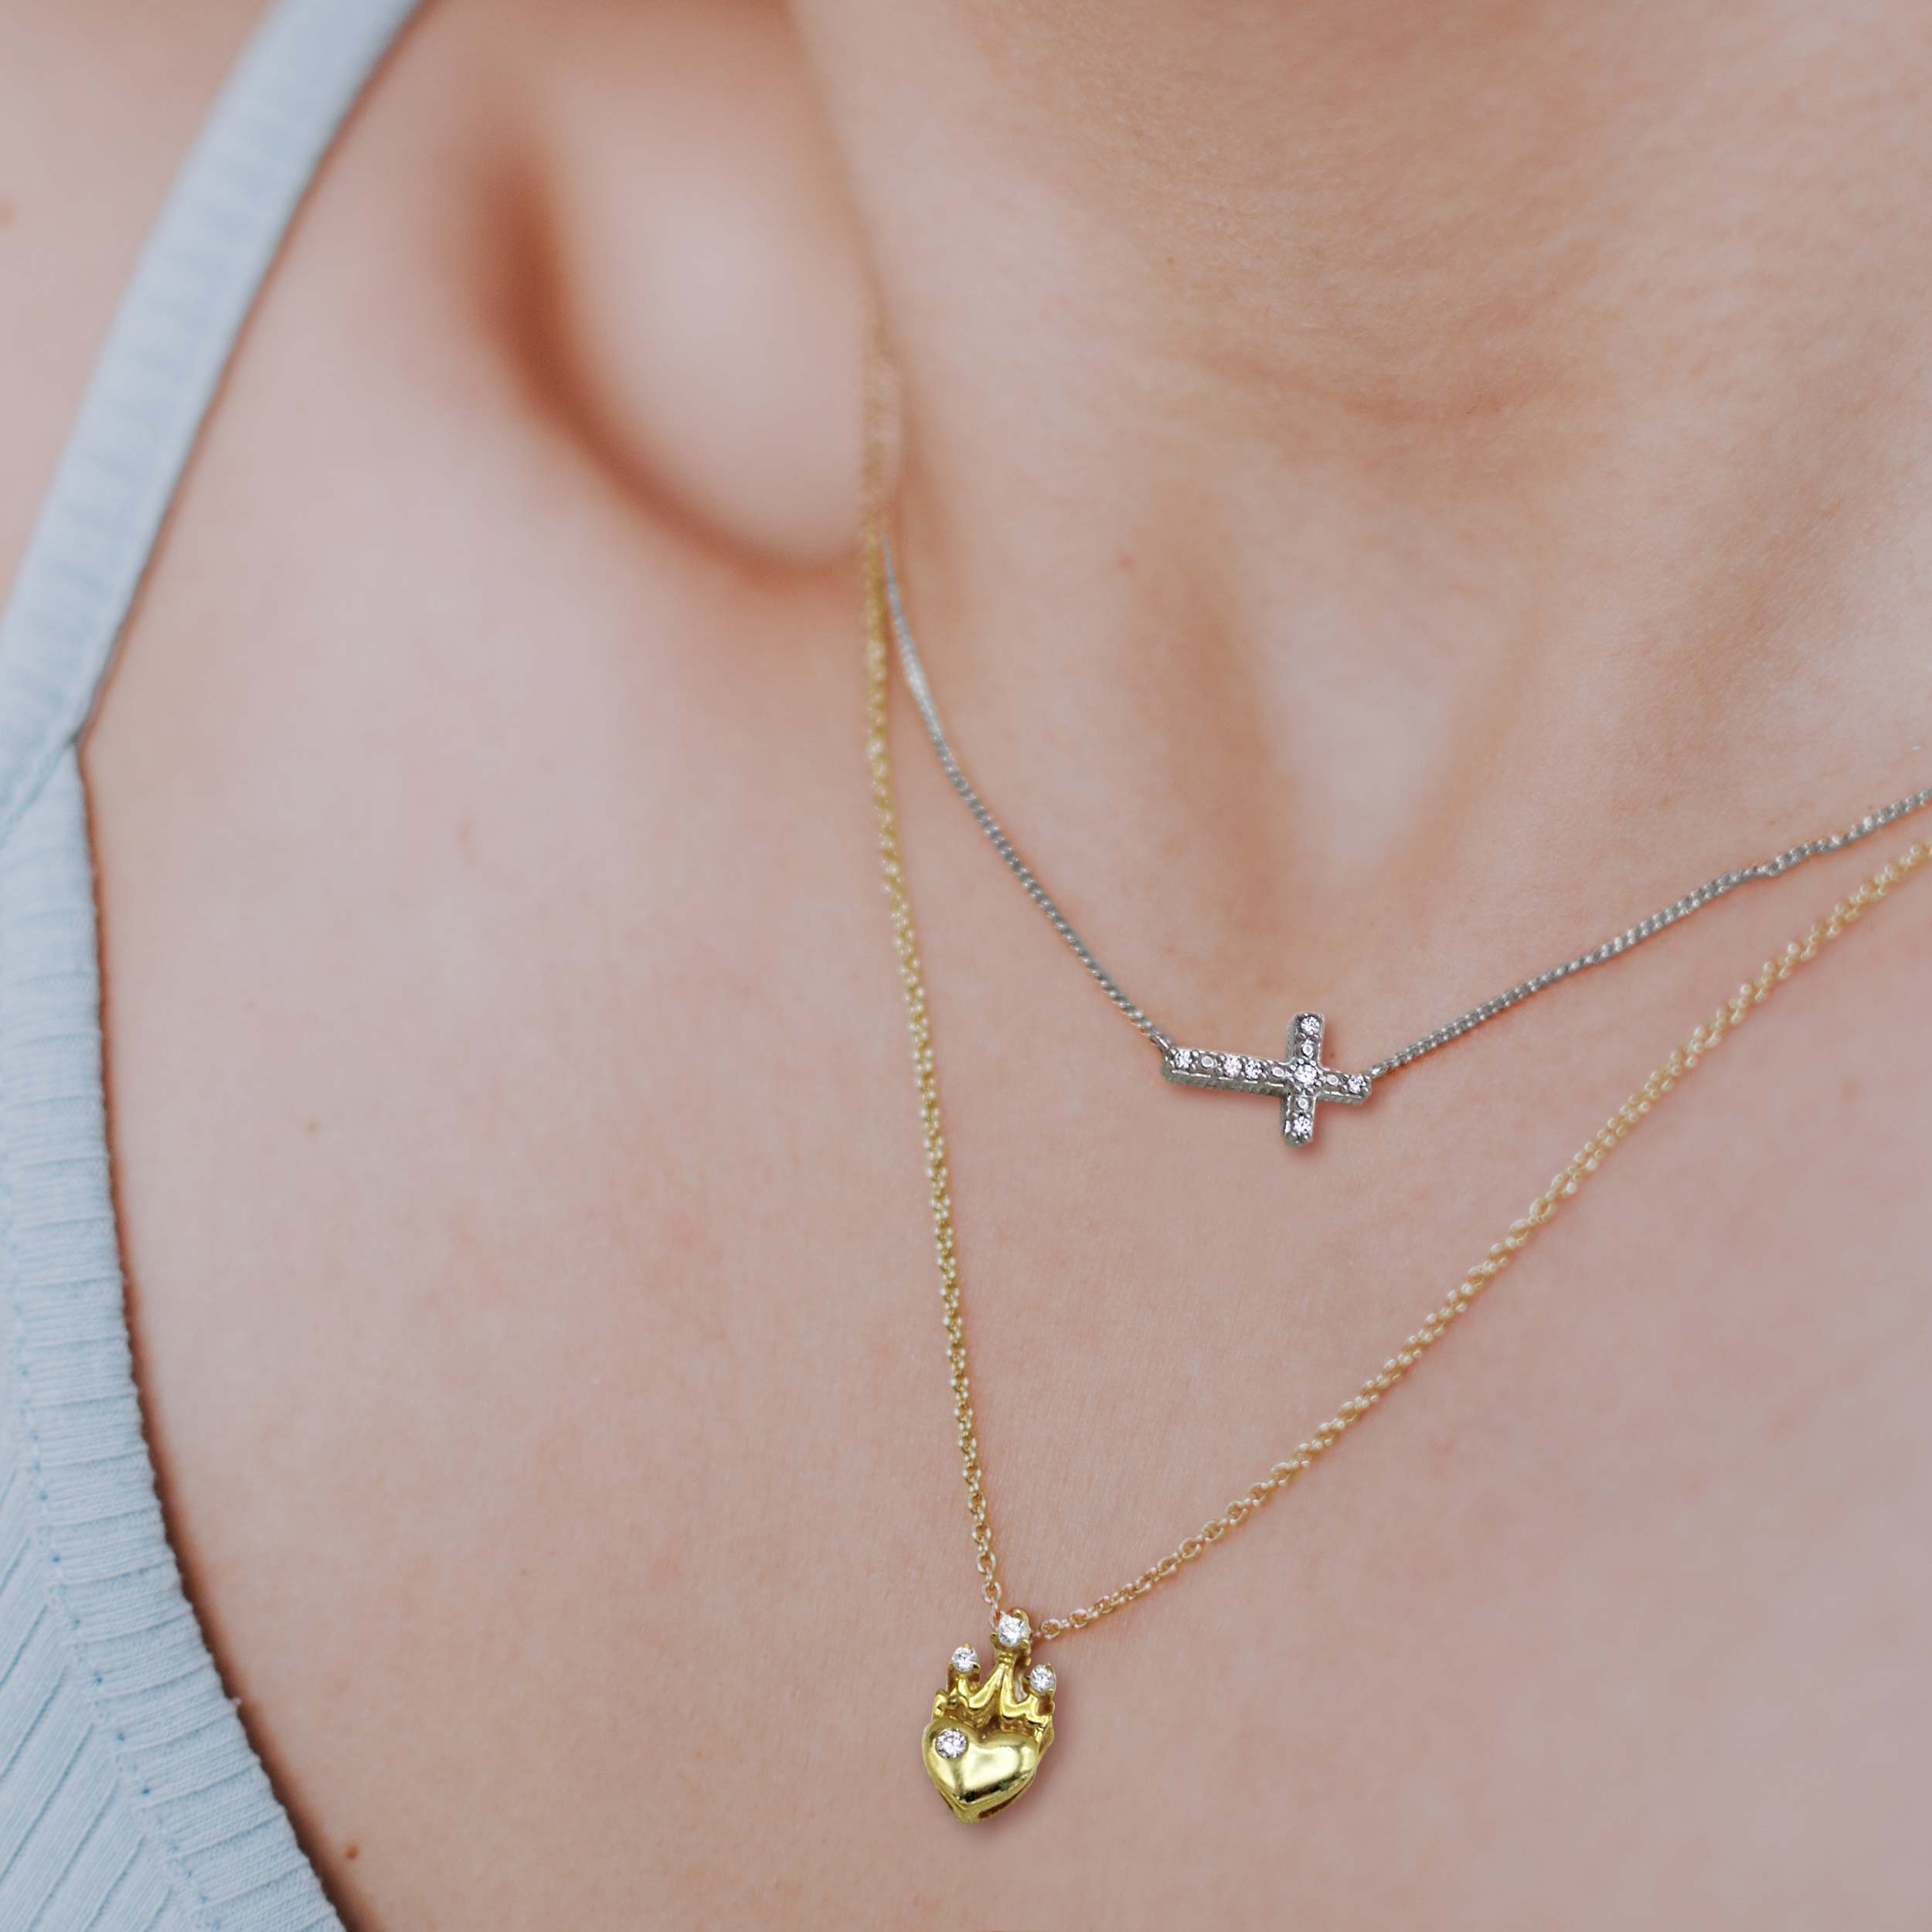 Exquisite Mini CZ Cross Sideways Choker Necklace For Women Gold/Silver,  Simple & Charming Gold Fashion Jewellery From Wzgtd, $16.91 | DHgate.Com